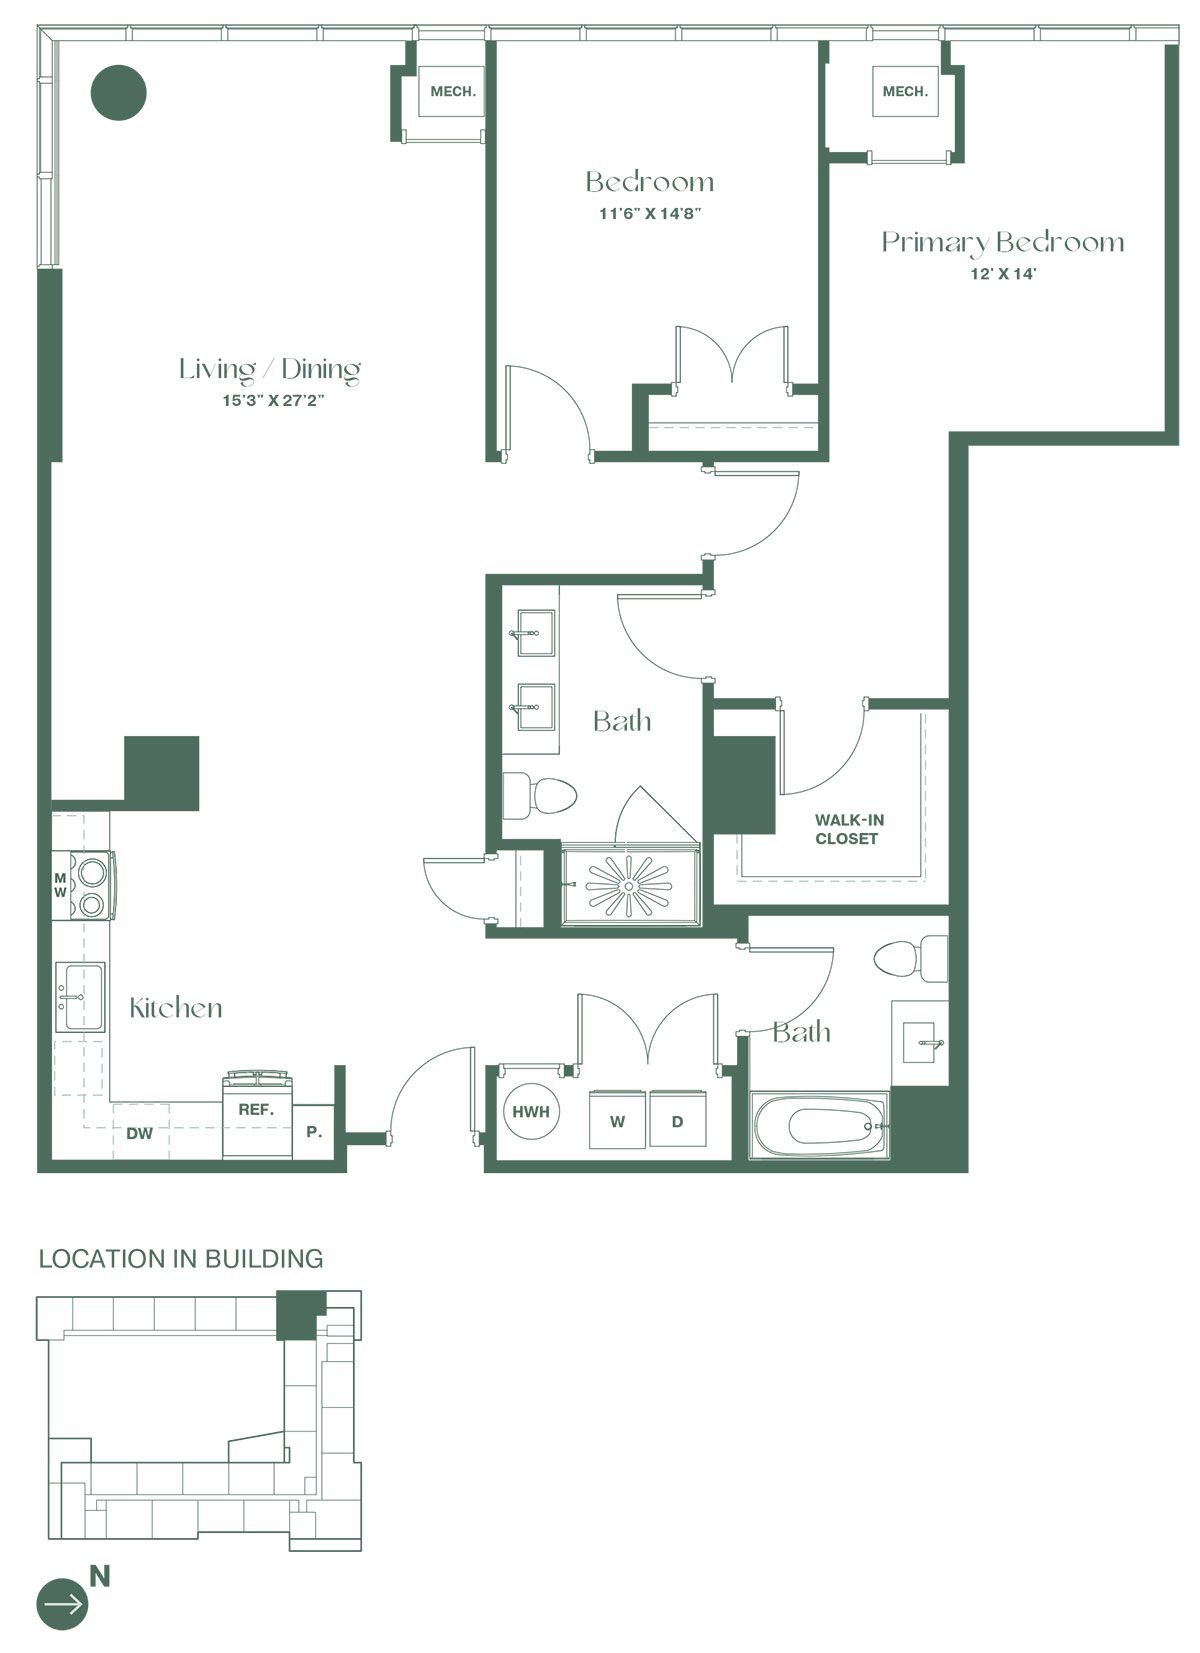 This floorplan for a two bedroom, two bathroom apartment with a den at RVR at Xchange starts with an hallway leading to a den and a full bathroom. Continuing into the apartment you will find a living and dining room area, a fully equipped kitchen with a pantry and dishwasher. To the right is a bedroom and the entrance to the primary bedroom containing a large walk-in closet and full bathroom.